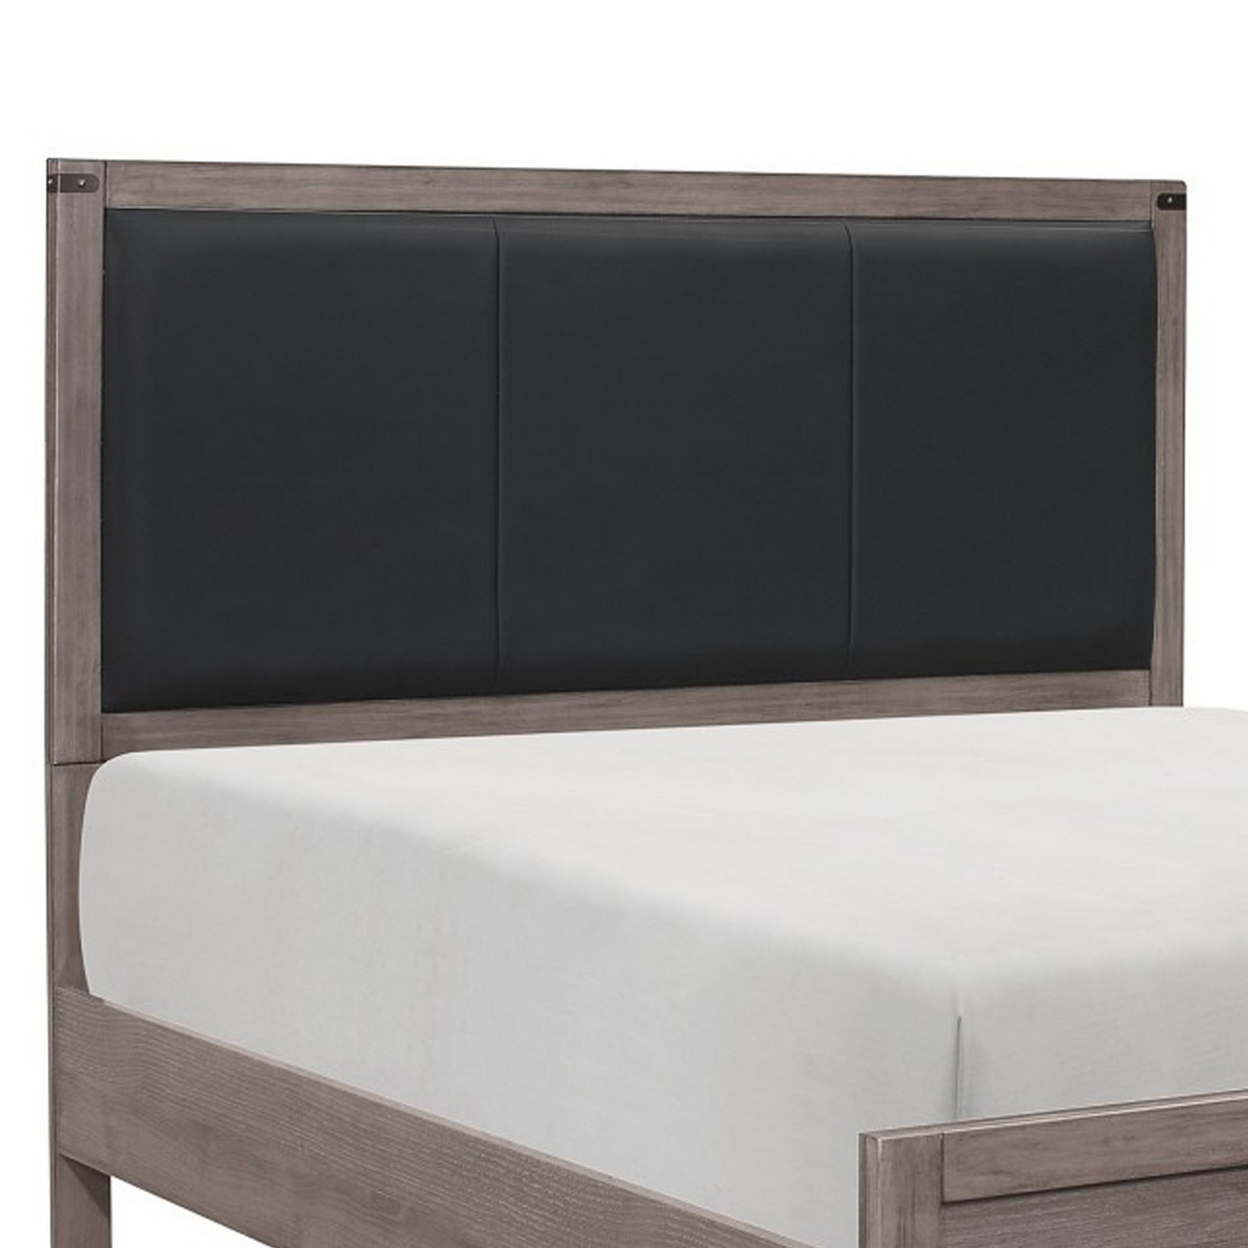 Fiona Queen Bed, Faux Leather Upholstered Black Headboard, Brownish Gray- Saltoro Sherpi